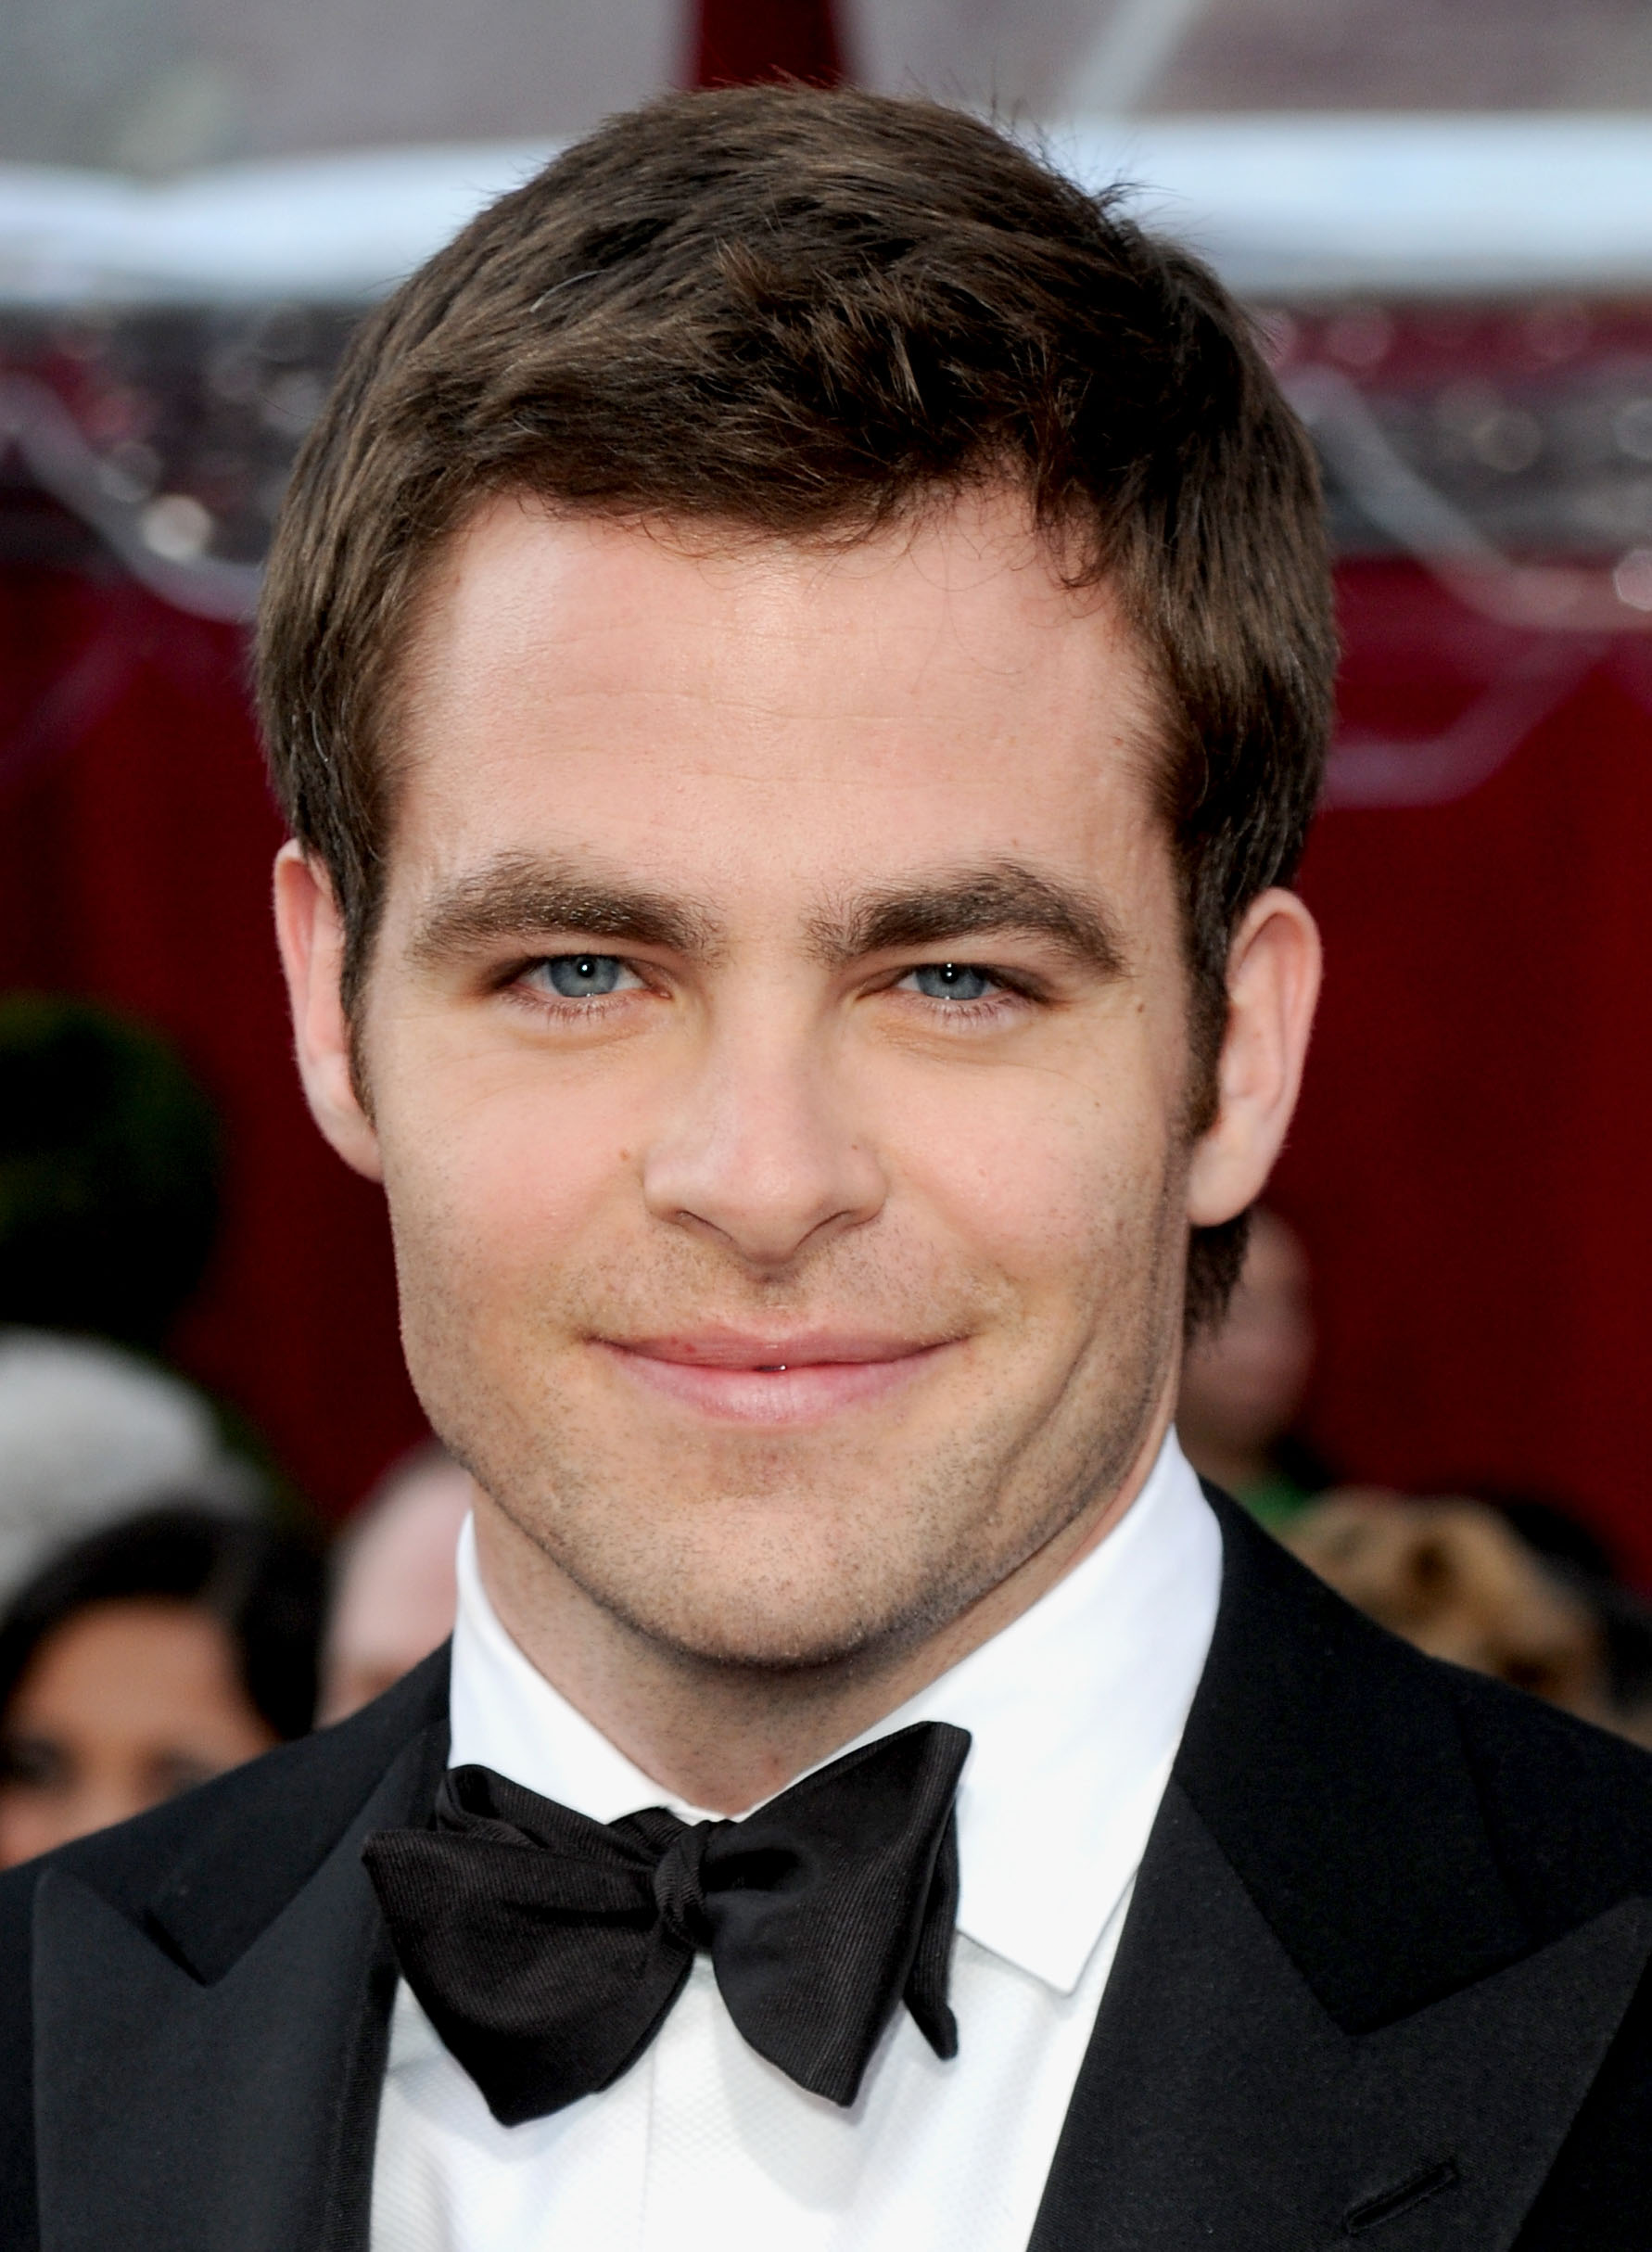 Chris Pine at the 82nd Annual Academy Awards on March 7, 2010 in Hollywood, California. | Source: Getty Images